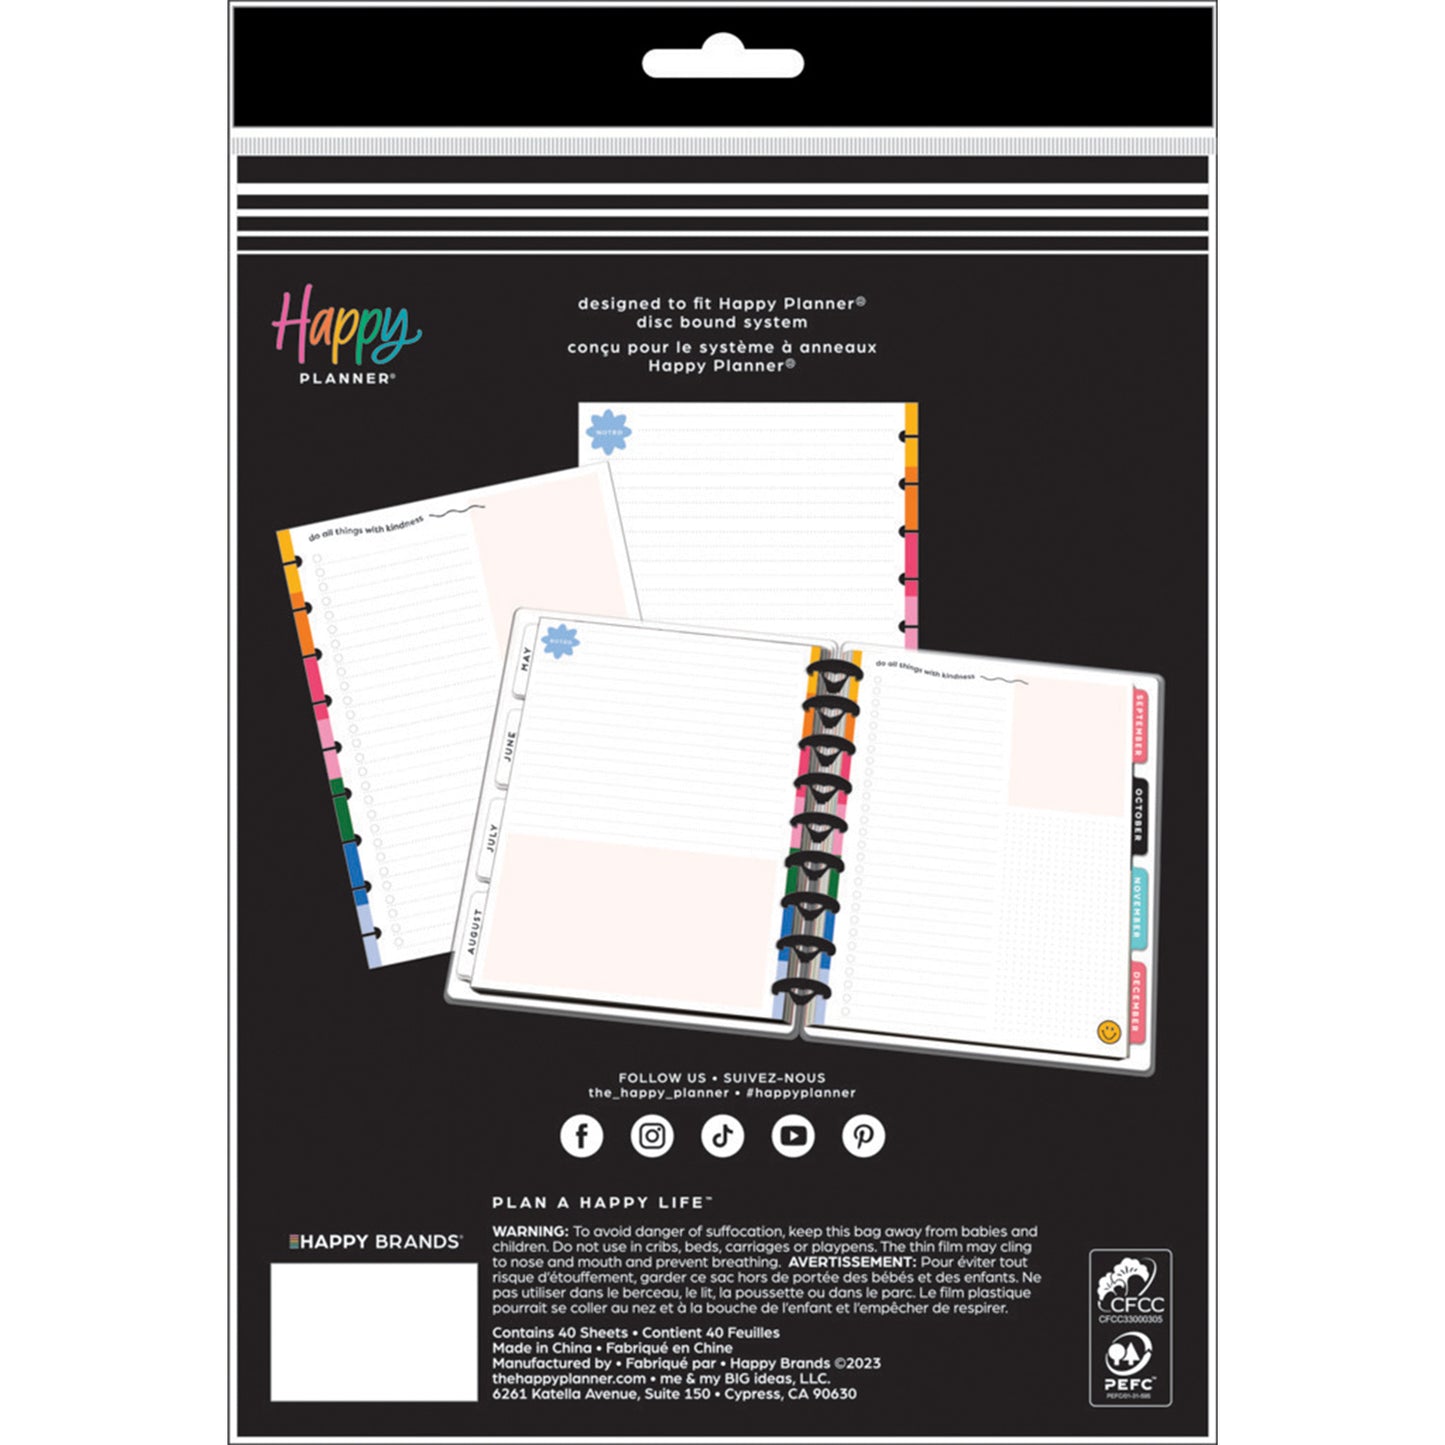 Happy Planner - Papel Classic - Playful Brights